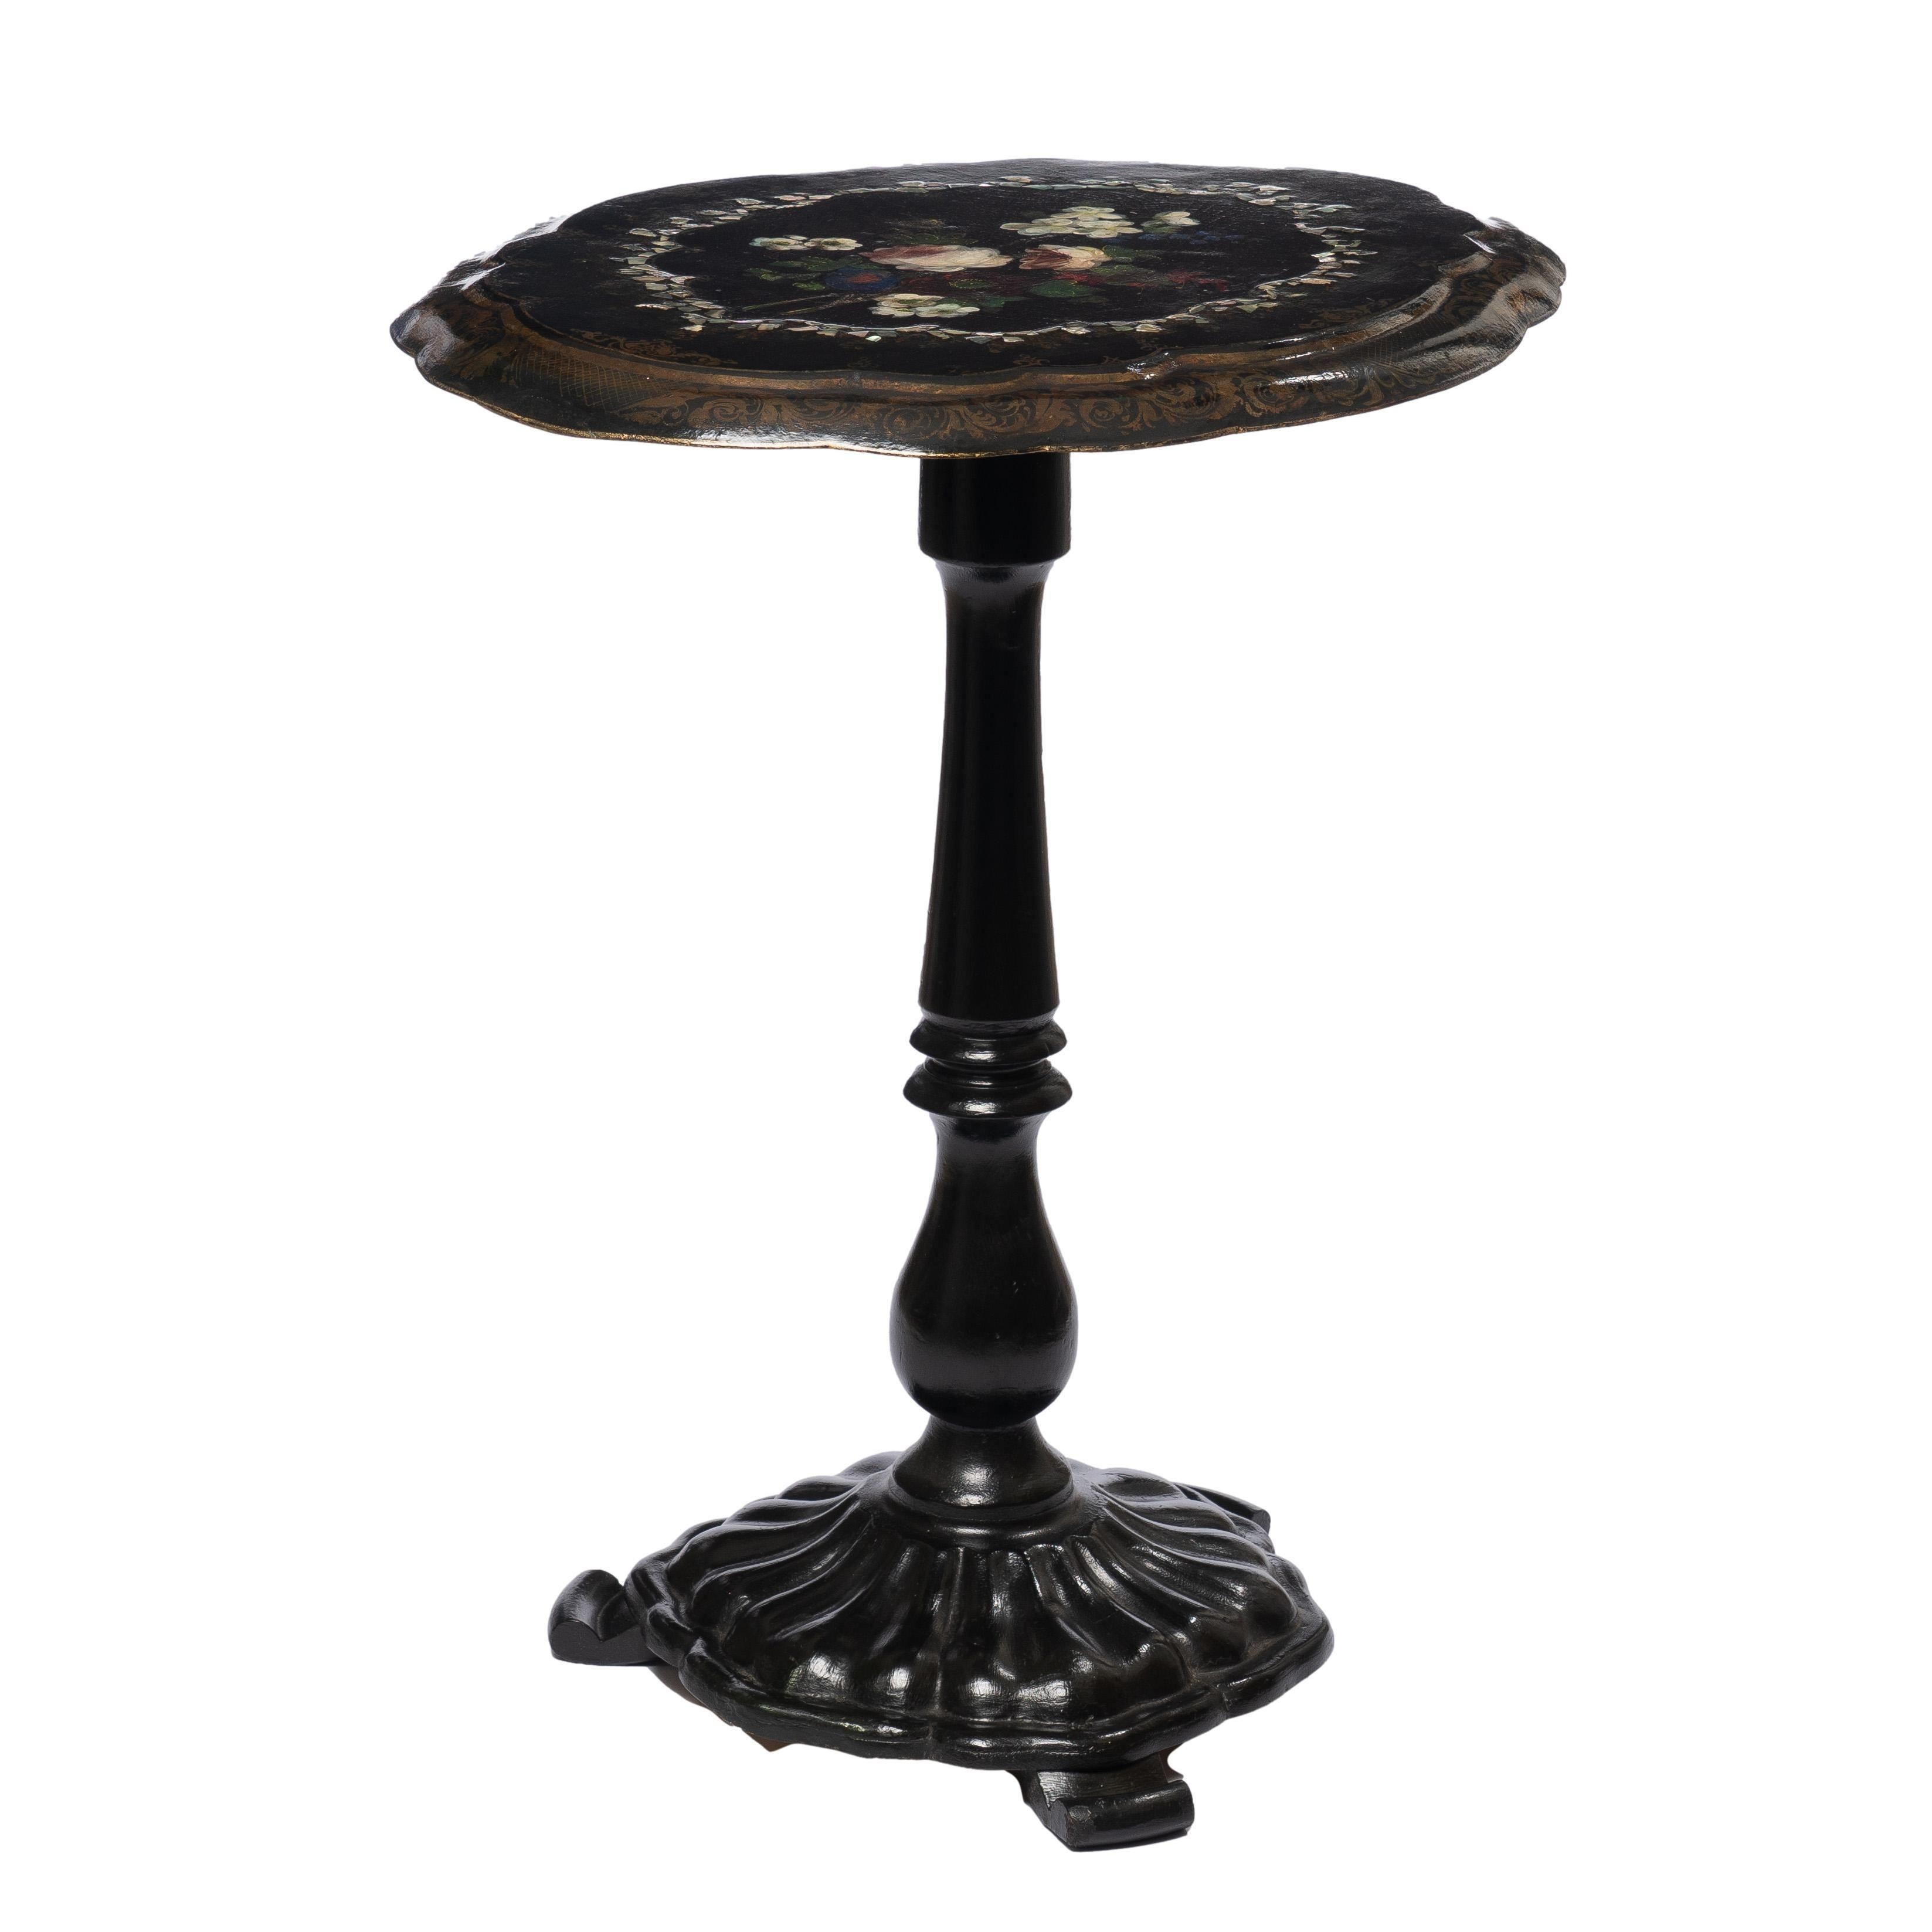 Mid-19th Century English Victorian Mother of Pearl & Painted Paper Mache Tilt Top Table, c. 1860 For Sale